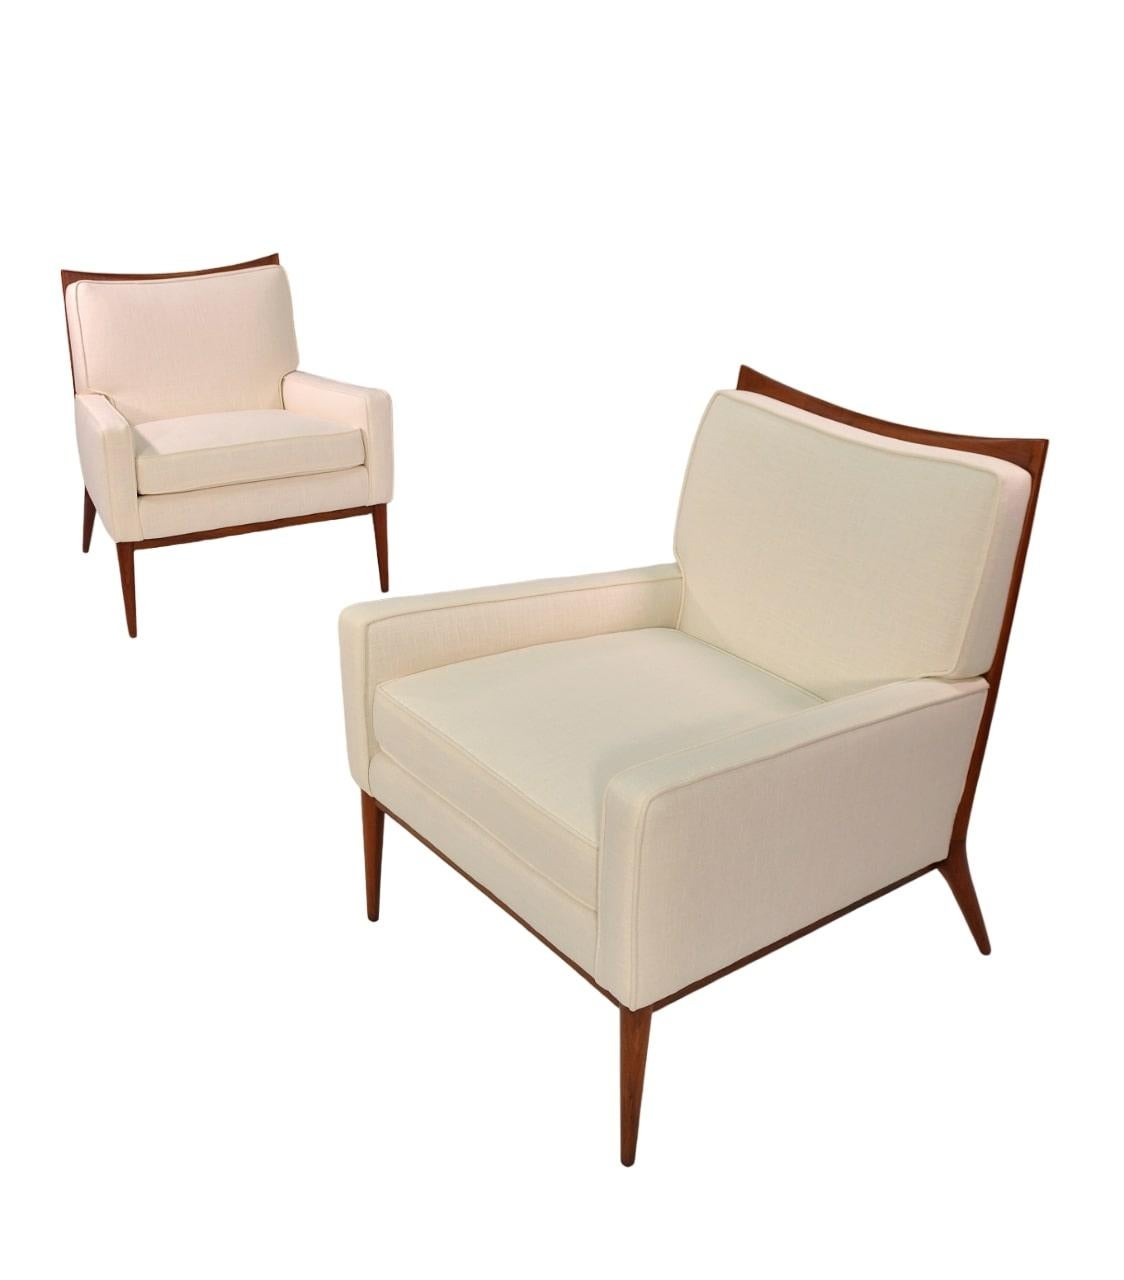 Paul McCobb White Linen Lounge Chairs for Directional, 1950s 1